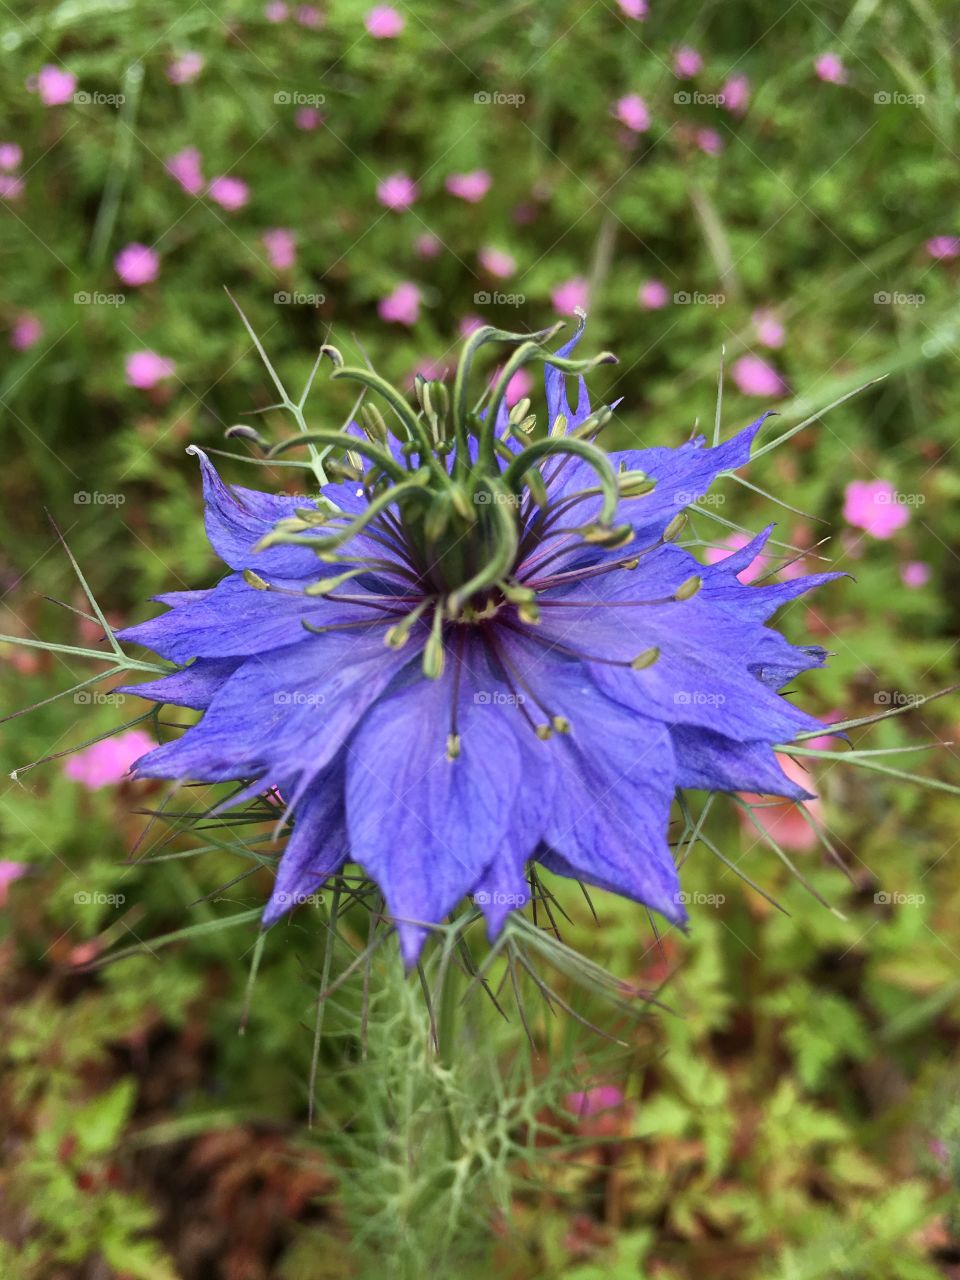 “ Love in a mist “ Nigella flower in lovely blue colour in close up with tiny pink herb Robert cranesbill flowers in the background in my garden